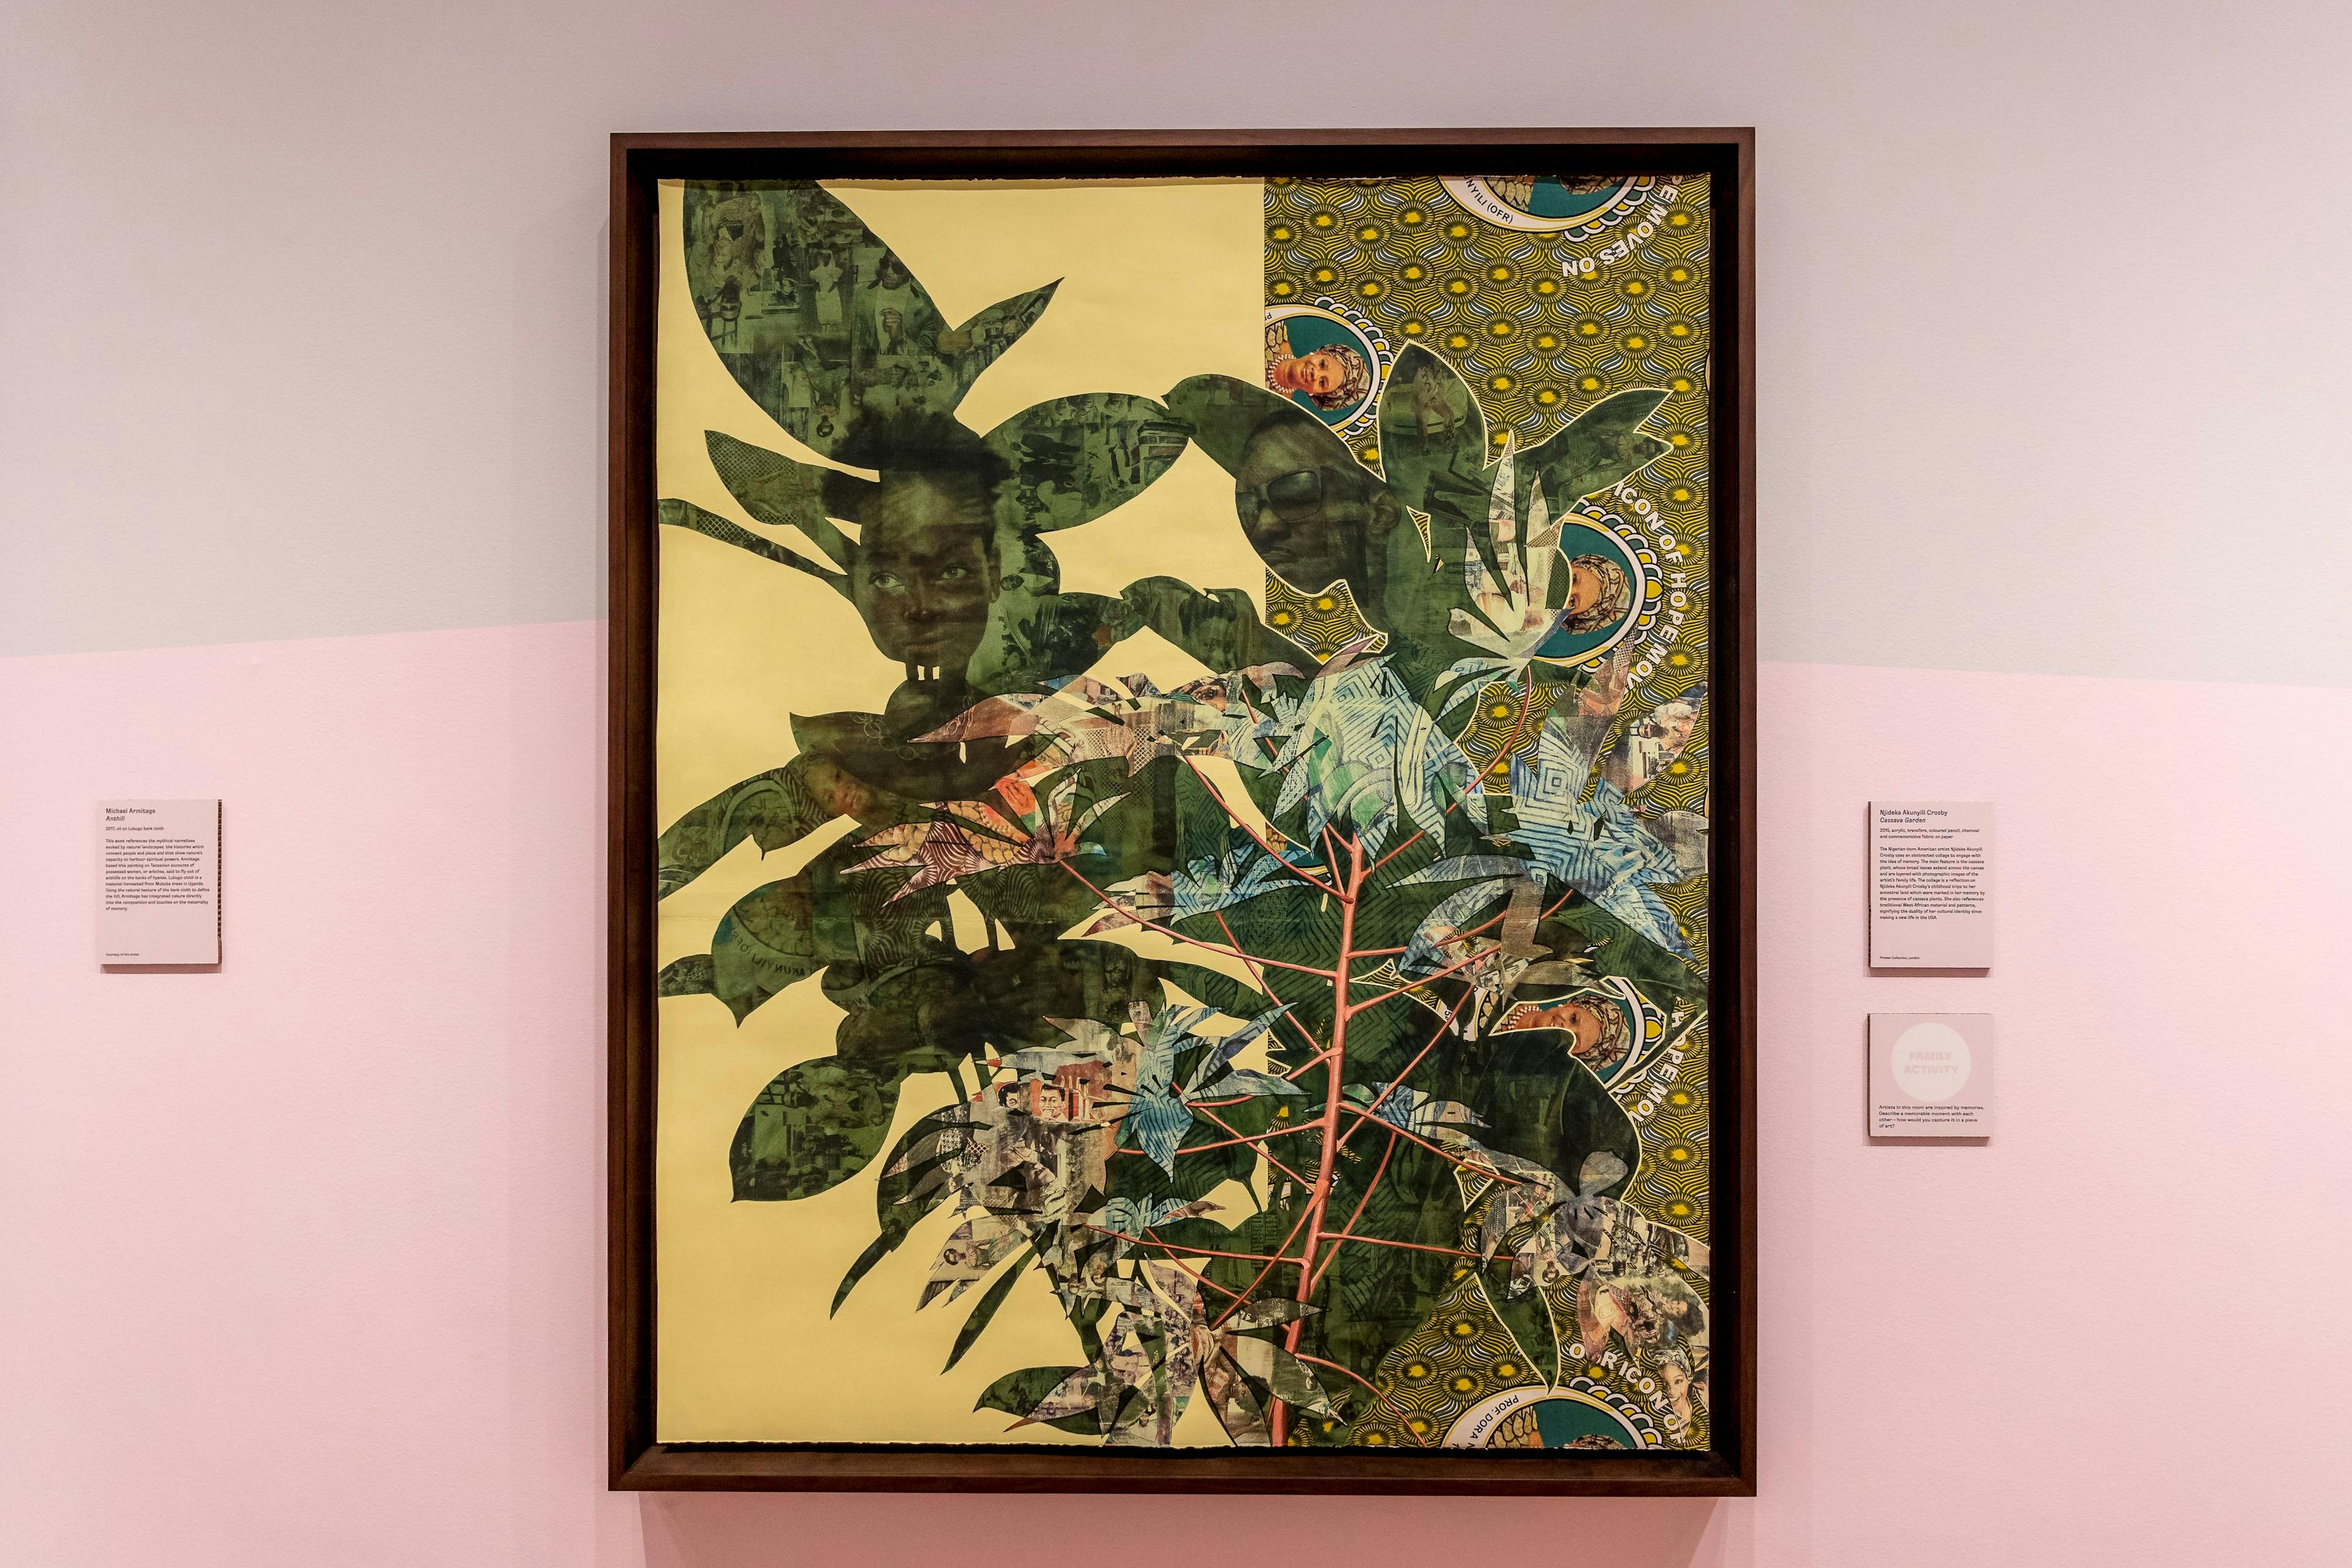 A painting by Njideka Akunyili Crosby, titled Cassava Garden, dated 2015.